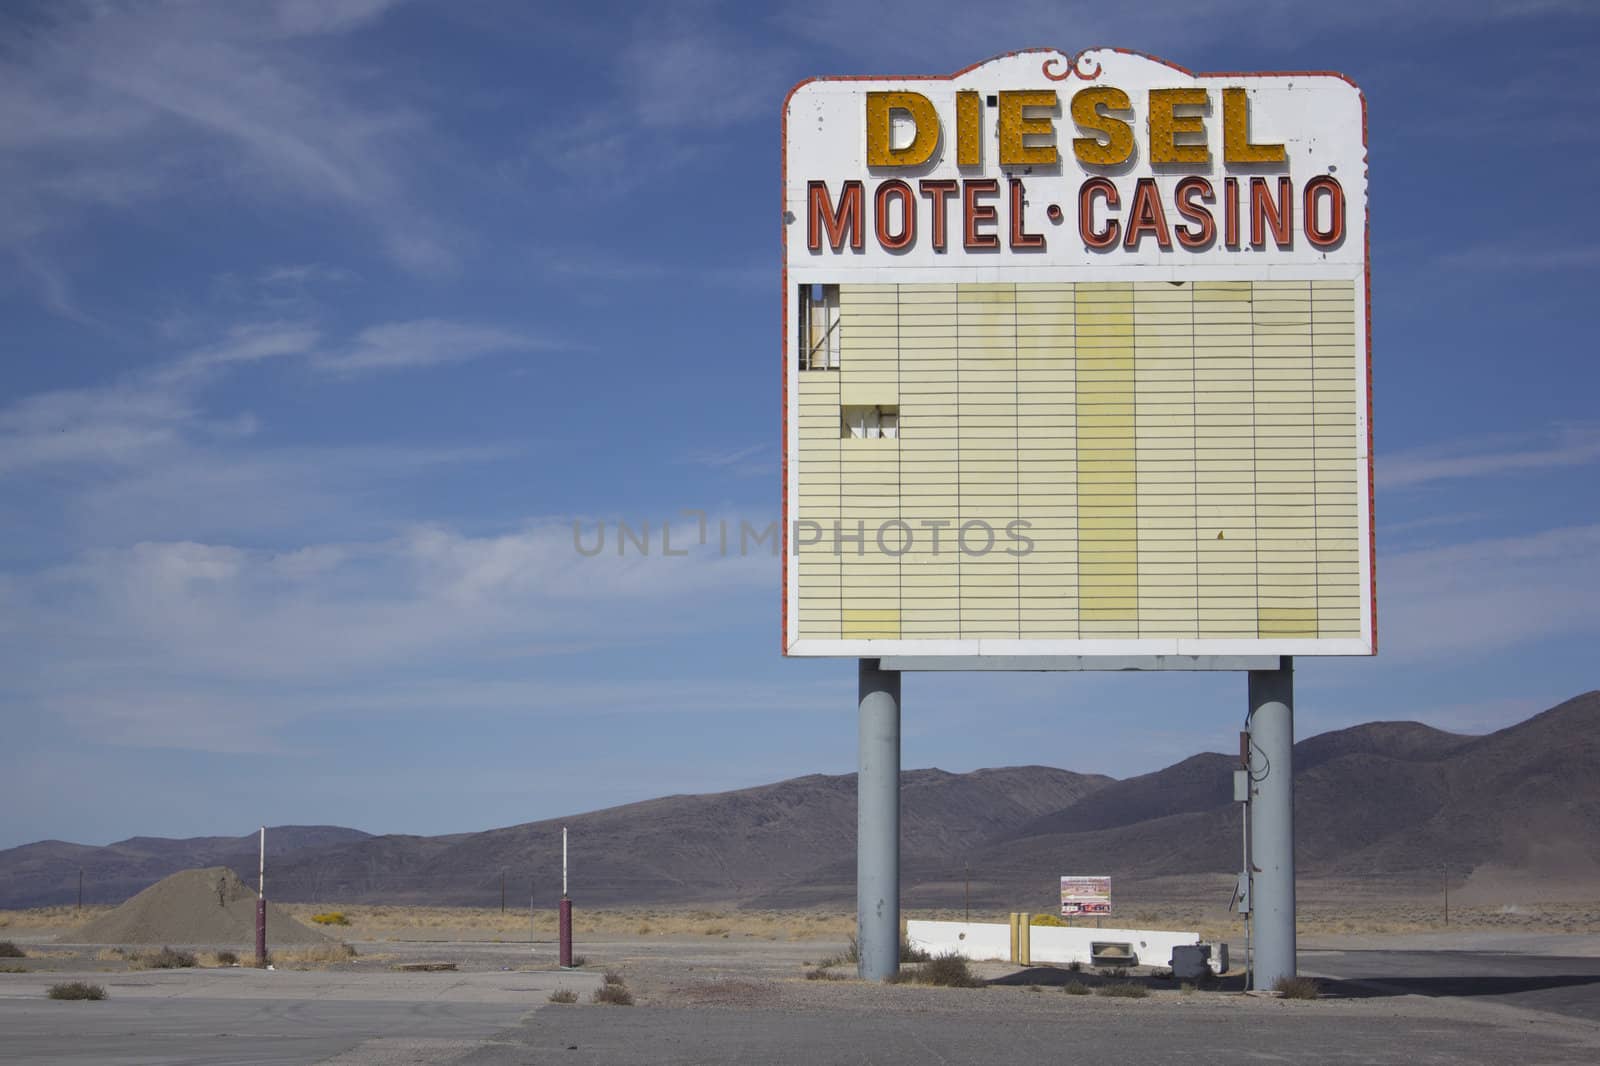 Vintage old gas diesel motel casino sign marquee by jeremywhat